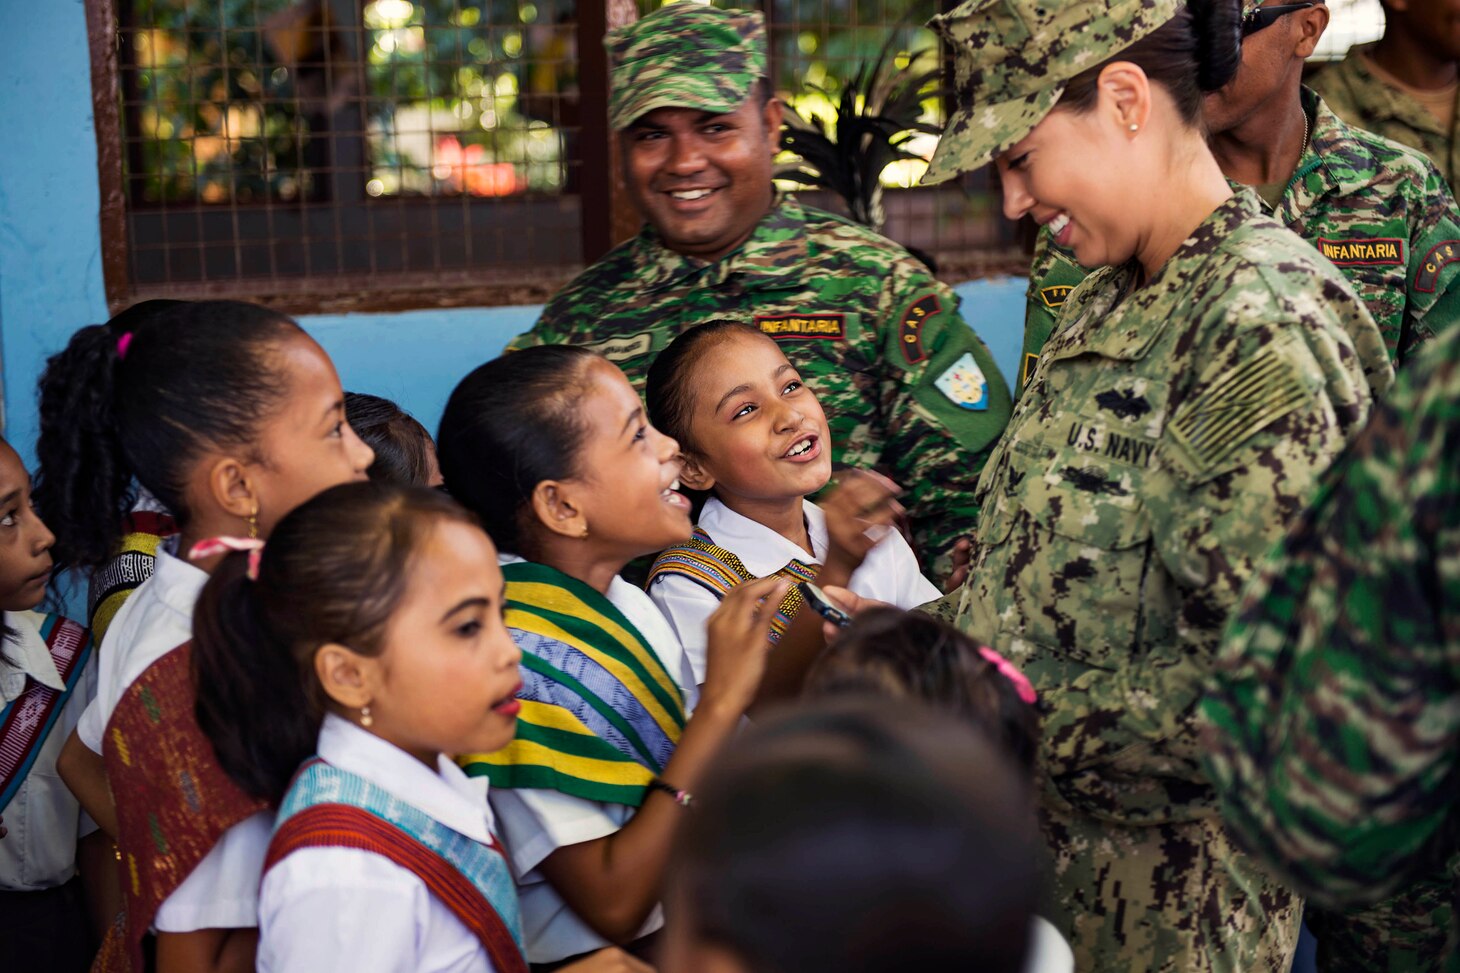 A group of students at Aimutin School speak with Petty Officer 3rd Class Margaret Villegas before a ribbon cutting marking the completion of the renovation of the school for Pacific Partnership 2016 in Dili, Timor Leste, June 20, 2016. Timorese Soldiers, U.S. Navy Seabees, U.S. Marines and Australian engineers have been working together to renovate the school's courtyard and facade. This year marks the sixth time the mission visited Timor Leste since its first visit in 2006. Medical, engineering and various other personnel embarked aboard Mercy are working side-by-side with partner nation counterparts, exchanging ideas, building best practices and relationships to ensure preparedness should disaster strike. U.S. Navy photo by Petty Officer Class Hank Gettys